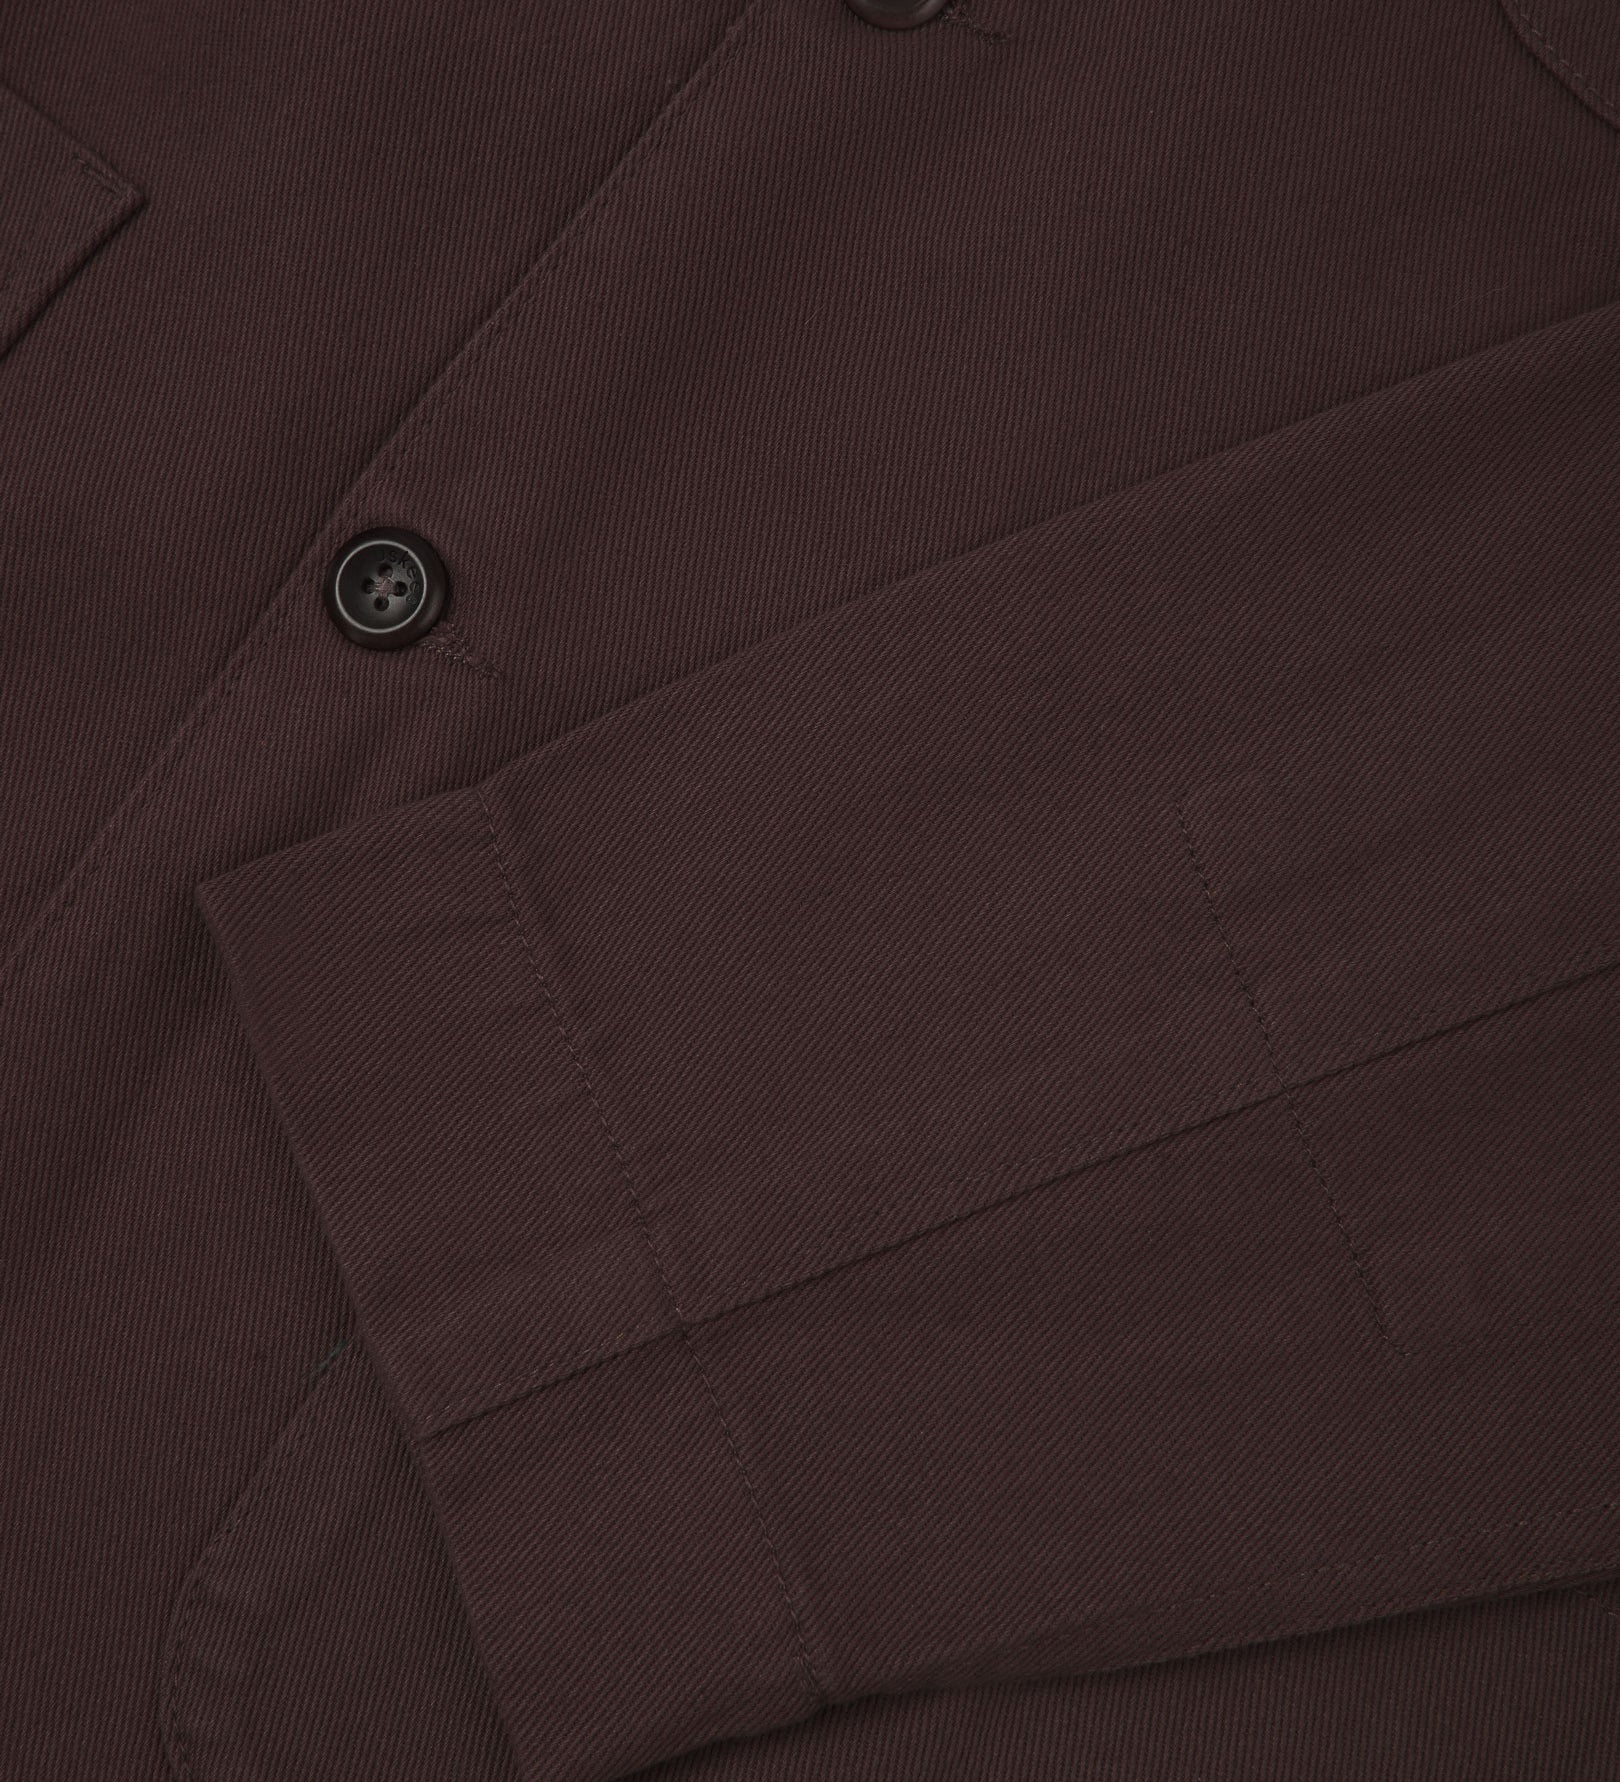 Closer detail view of patch pockets, cuff detailing, corozo buttons and extra durable weave of the organic cotton drill fabric.